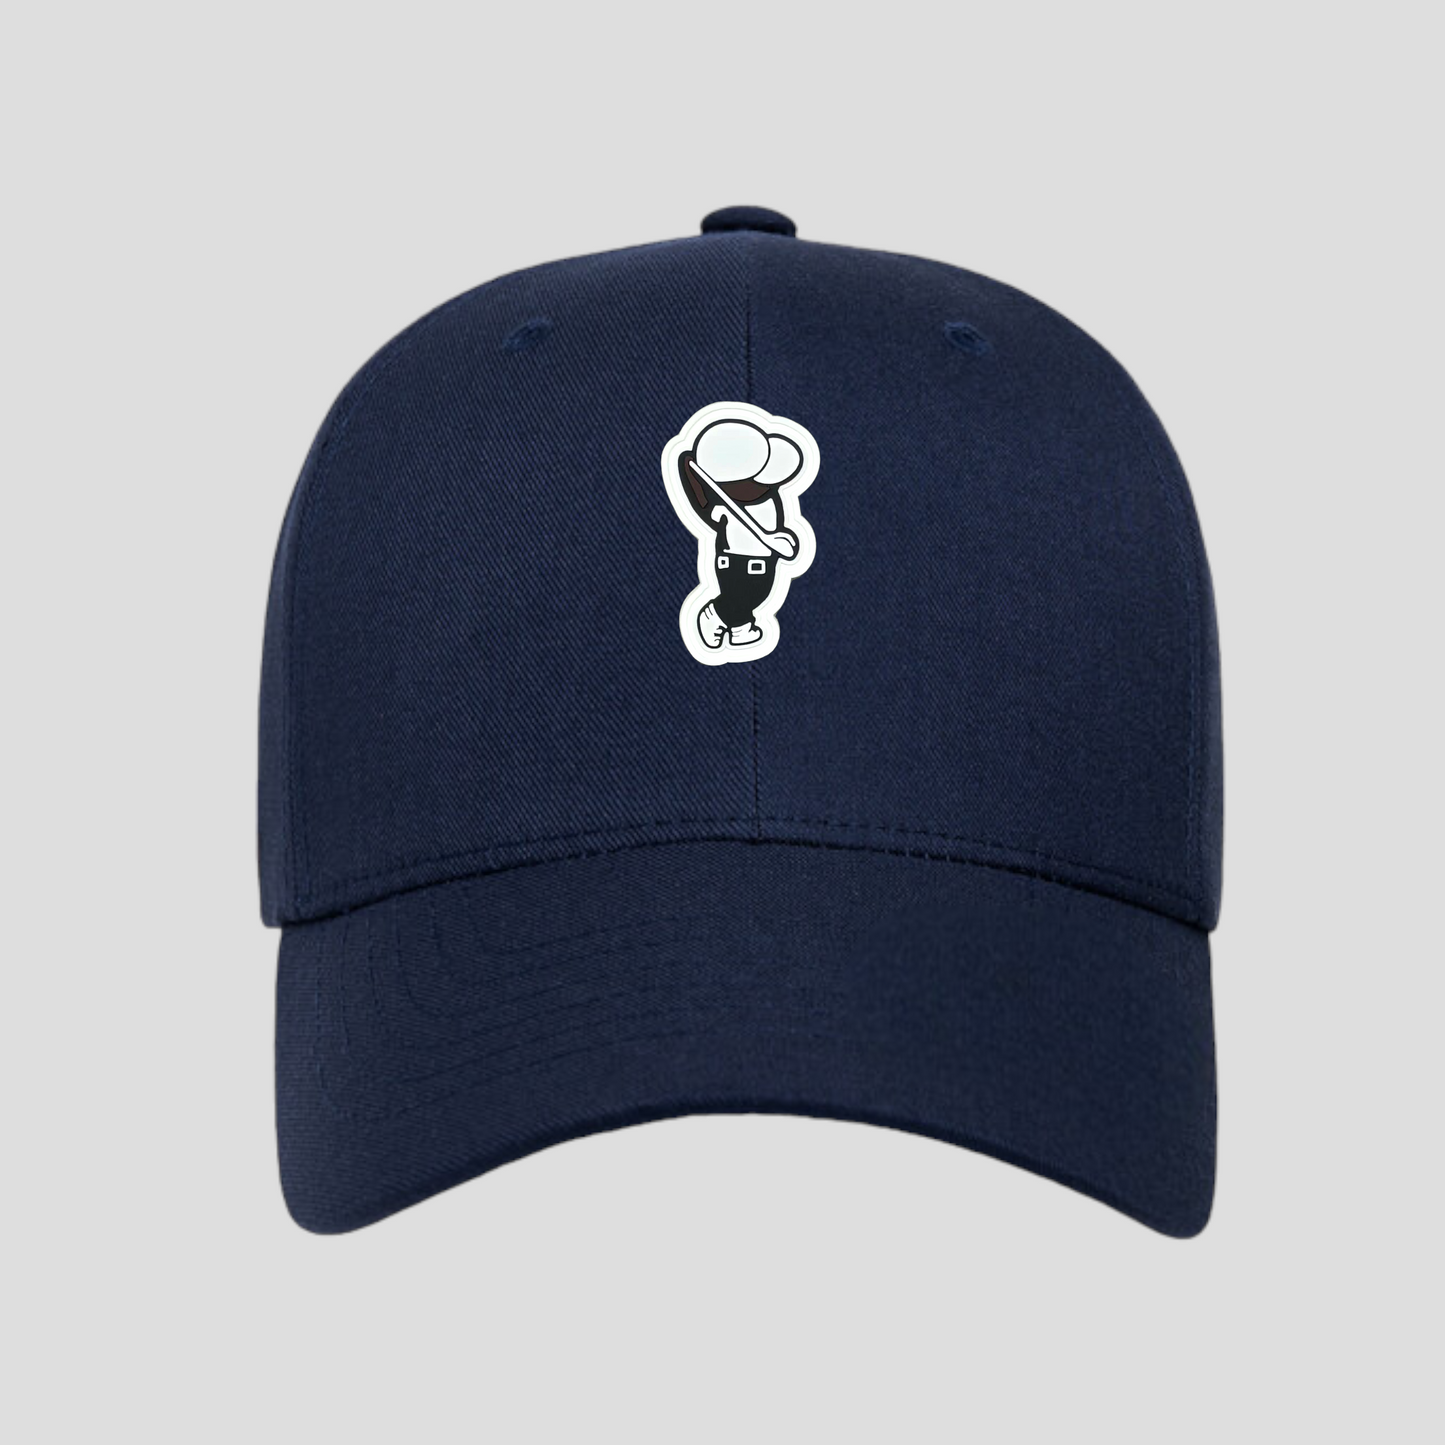 Golfer Bro Curved Bill Fitted